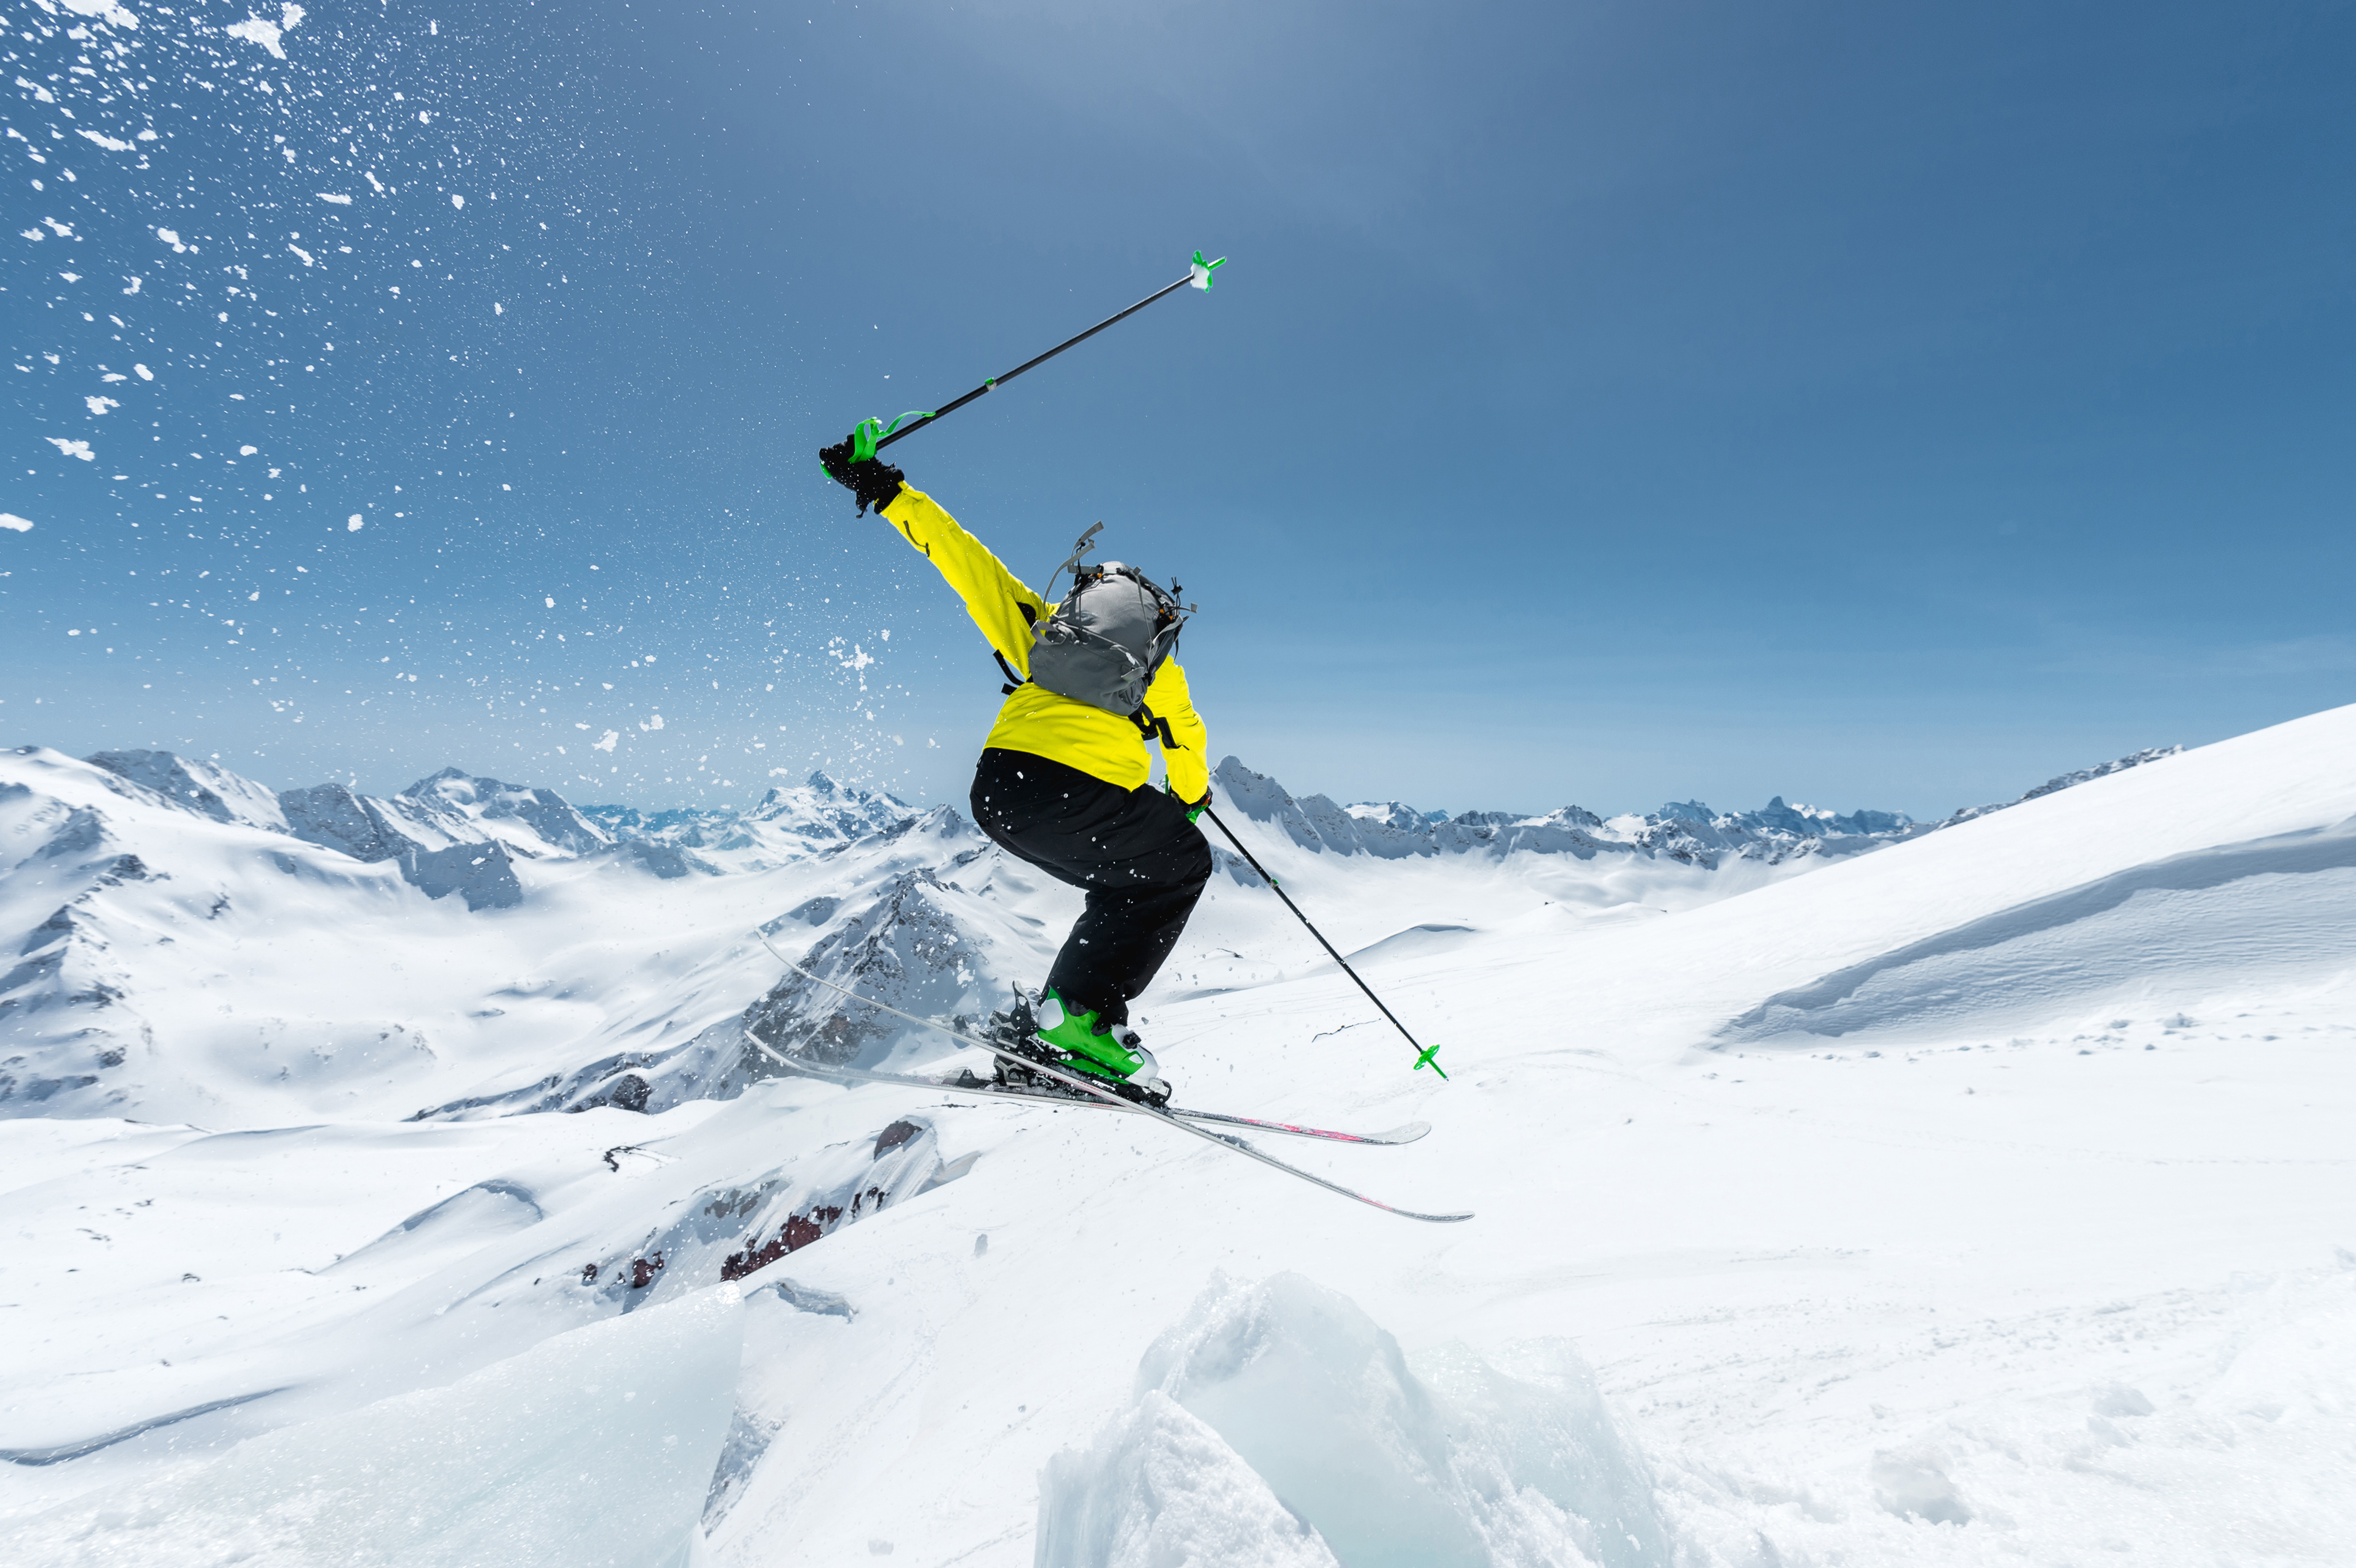 skiing 4k ultra hd wallpaper background image 4500x2995 id 997934 wallpaper abyss...